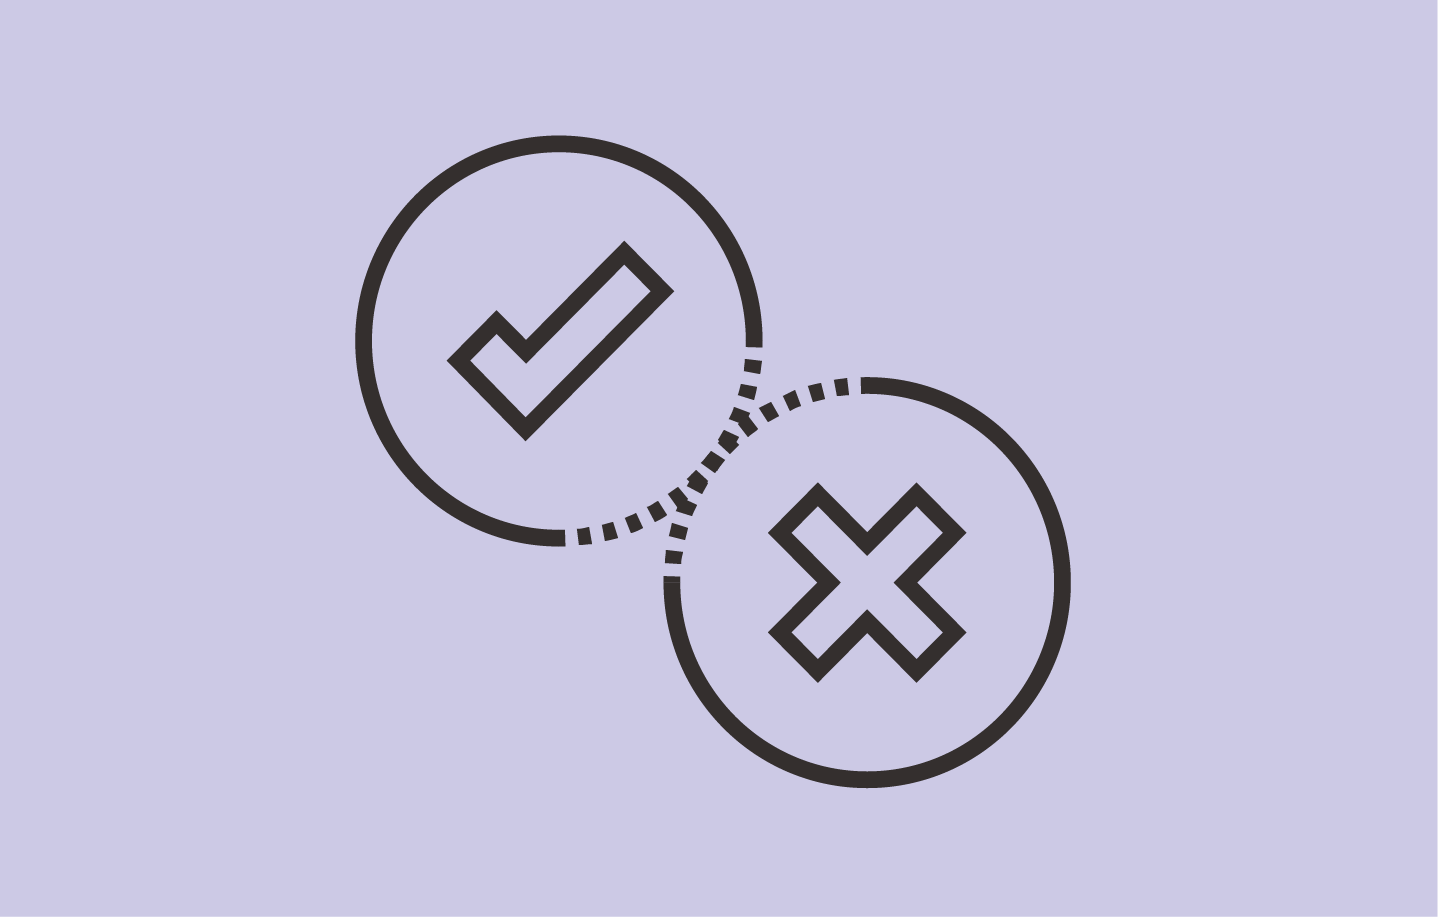 Illustration of an "X" and "checkmark"